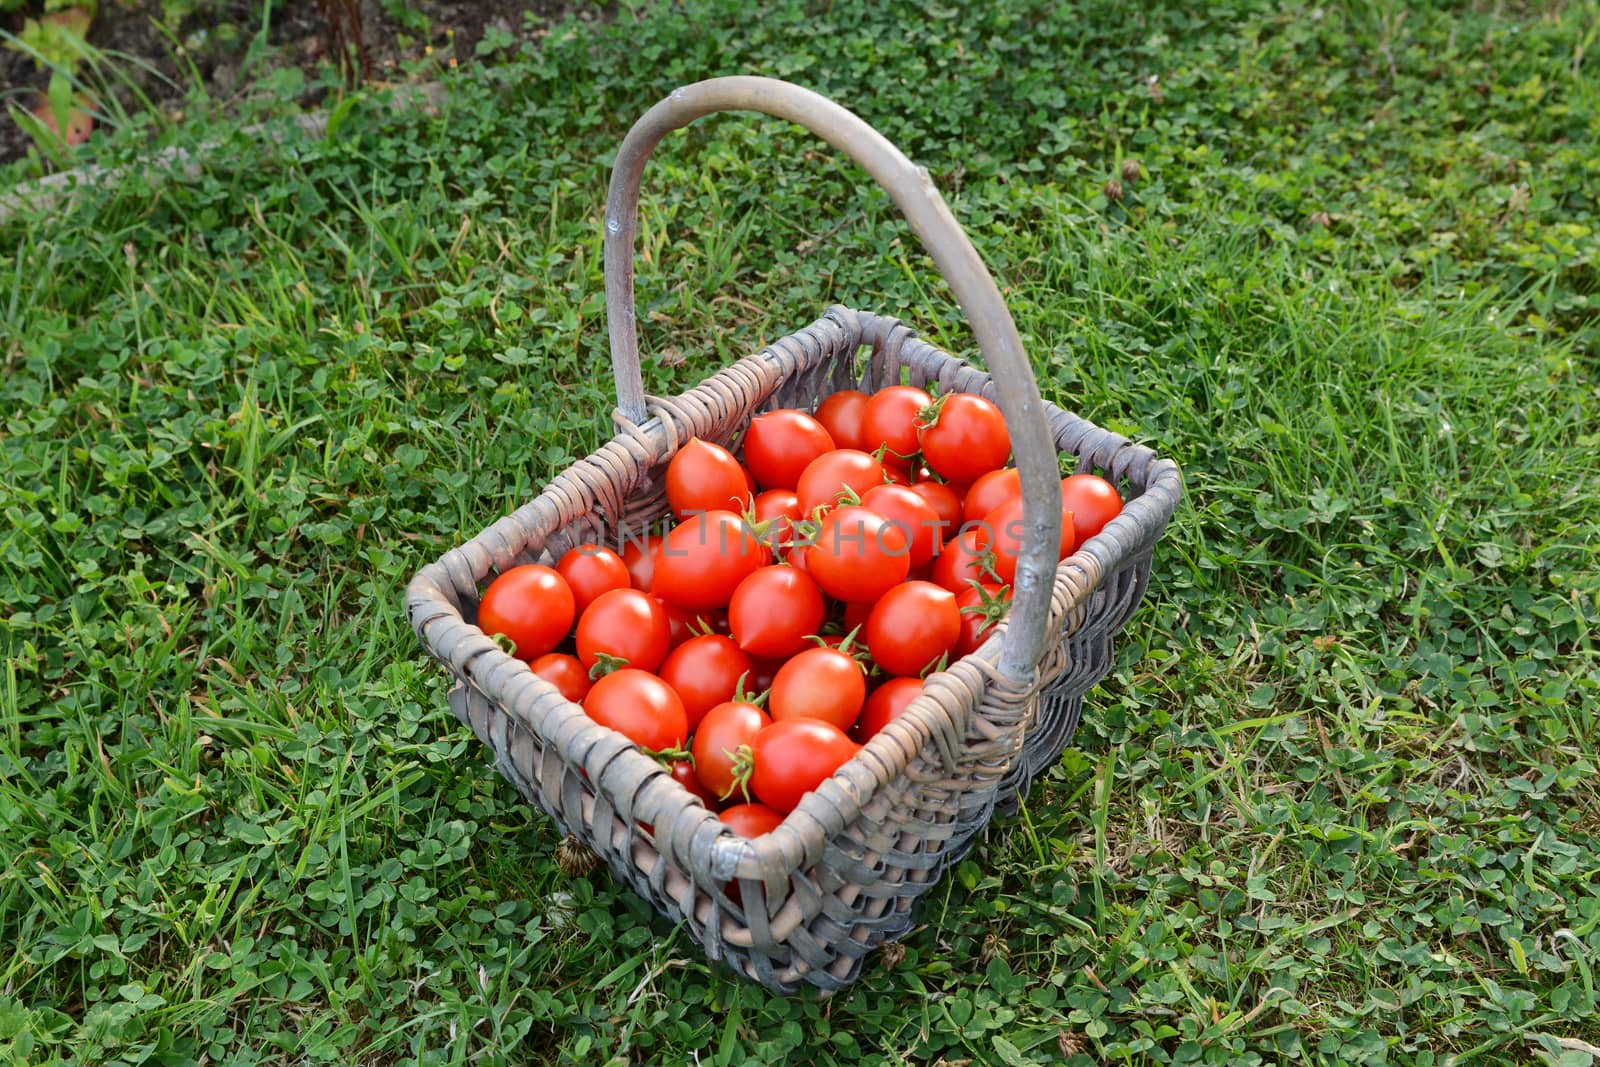 Freshly harvested Red Alert cherry tomatoes in a woven basket on lush green grass in an allotment garden